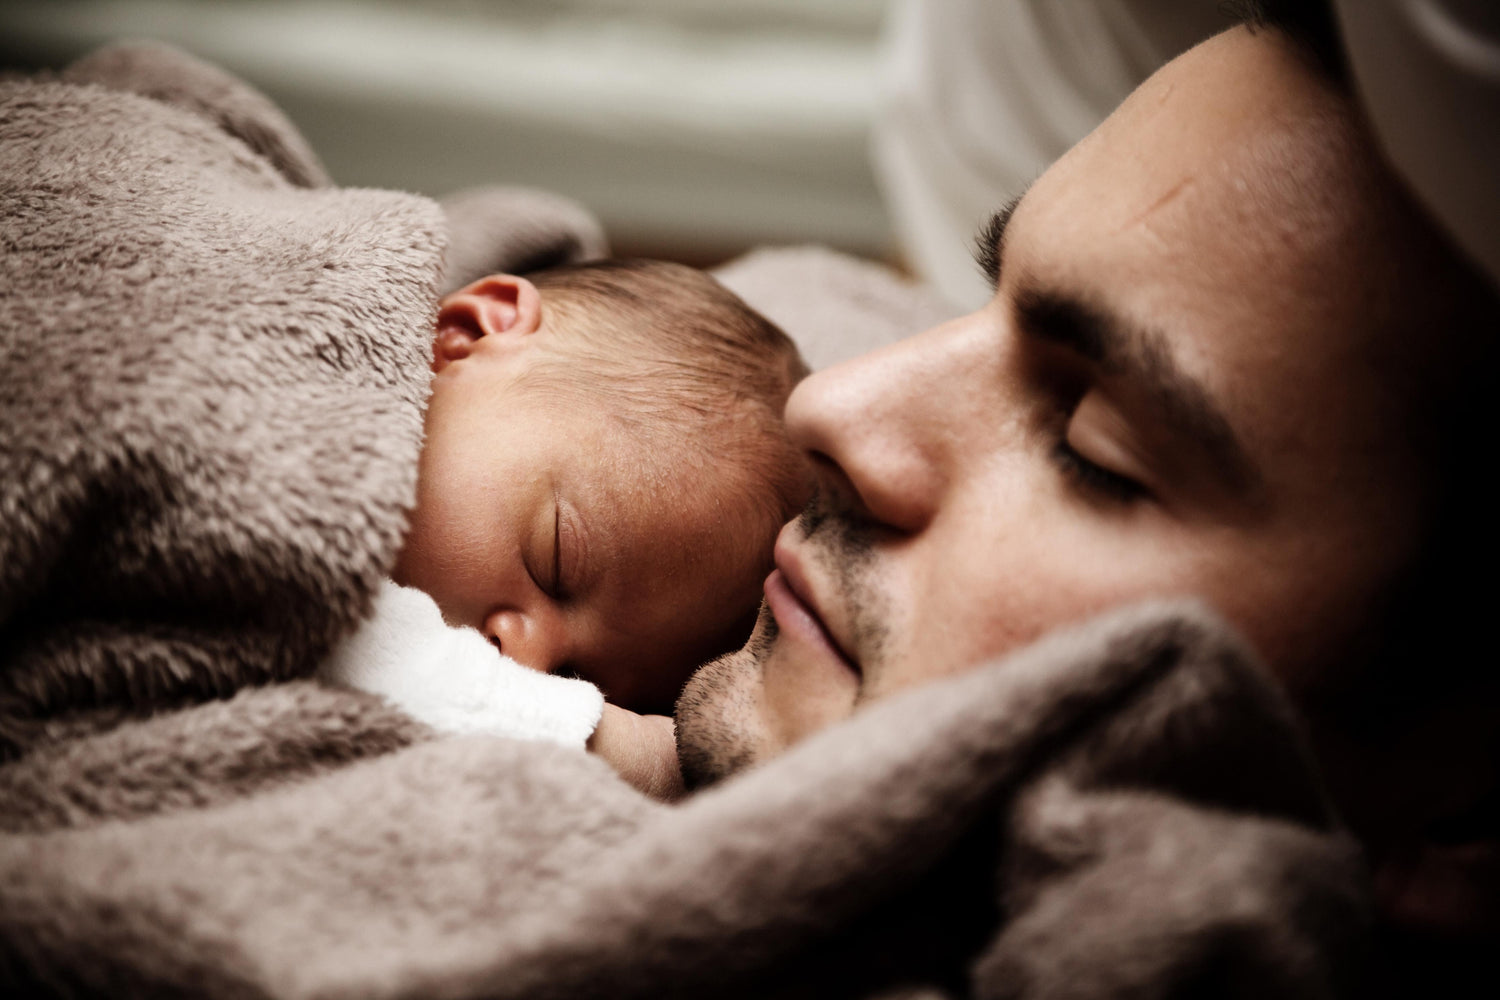 How has the role of fathers and breastfeeding changed over the years? - Hegen